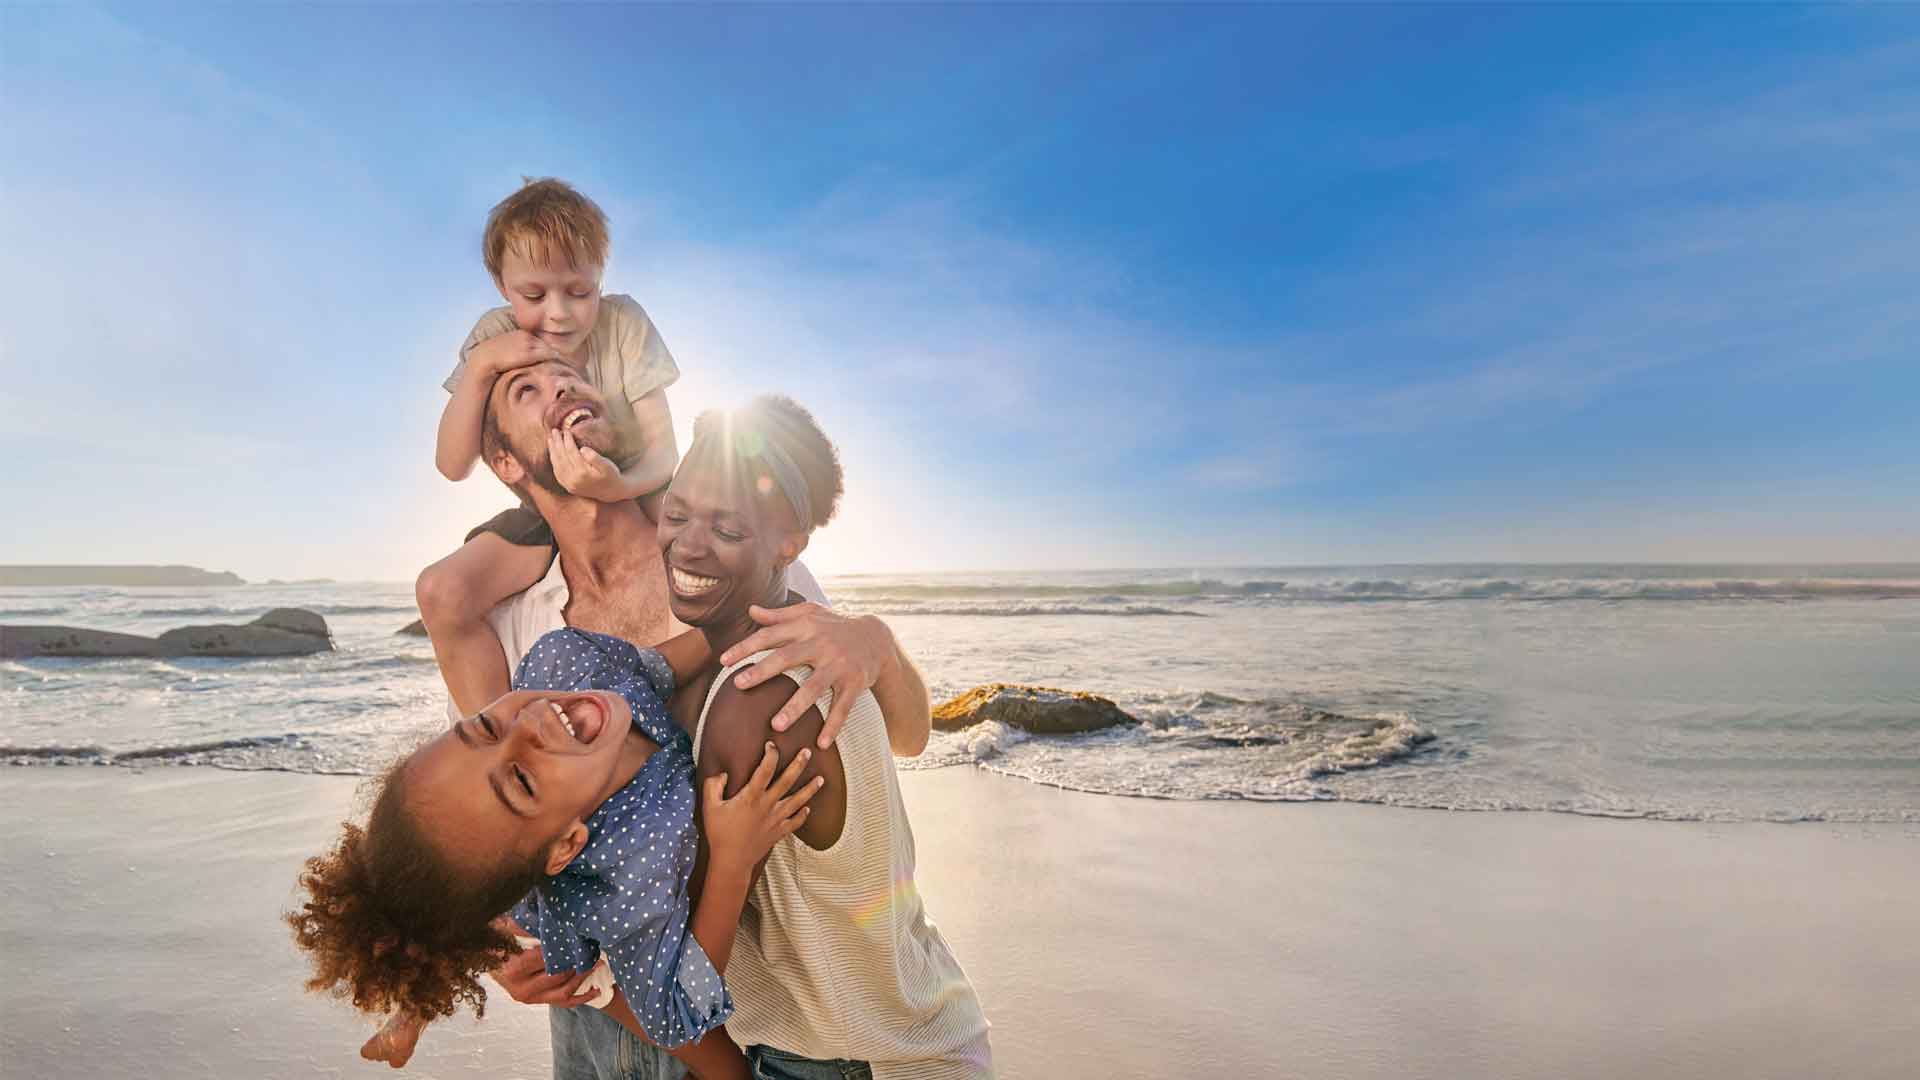 A family of 4 of mixed ethnicity laughing happily on the beach. 